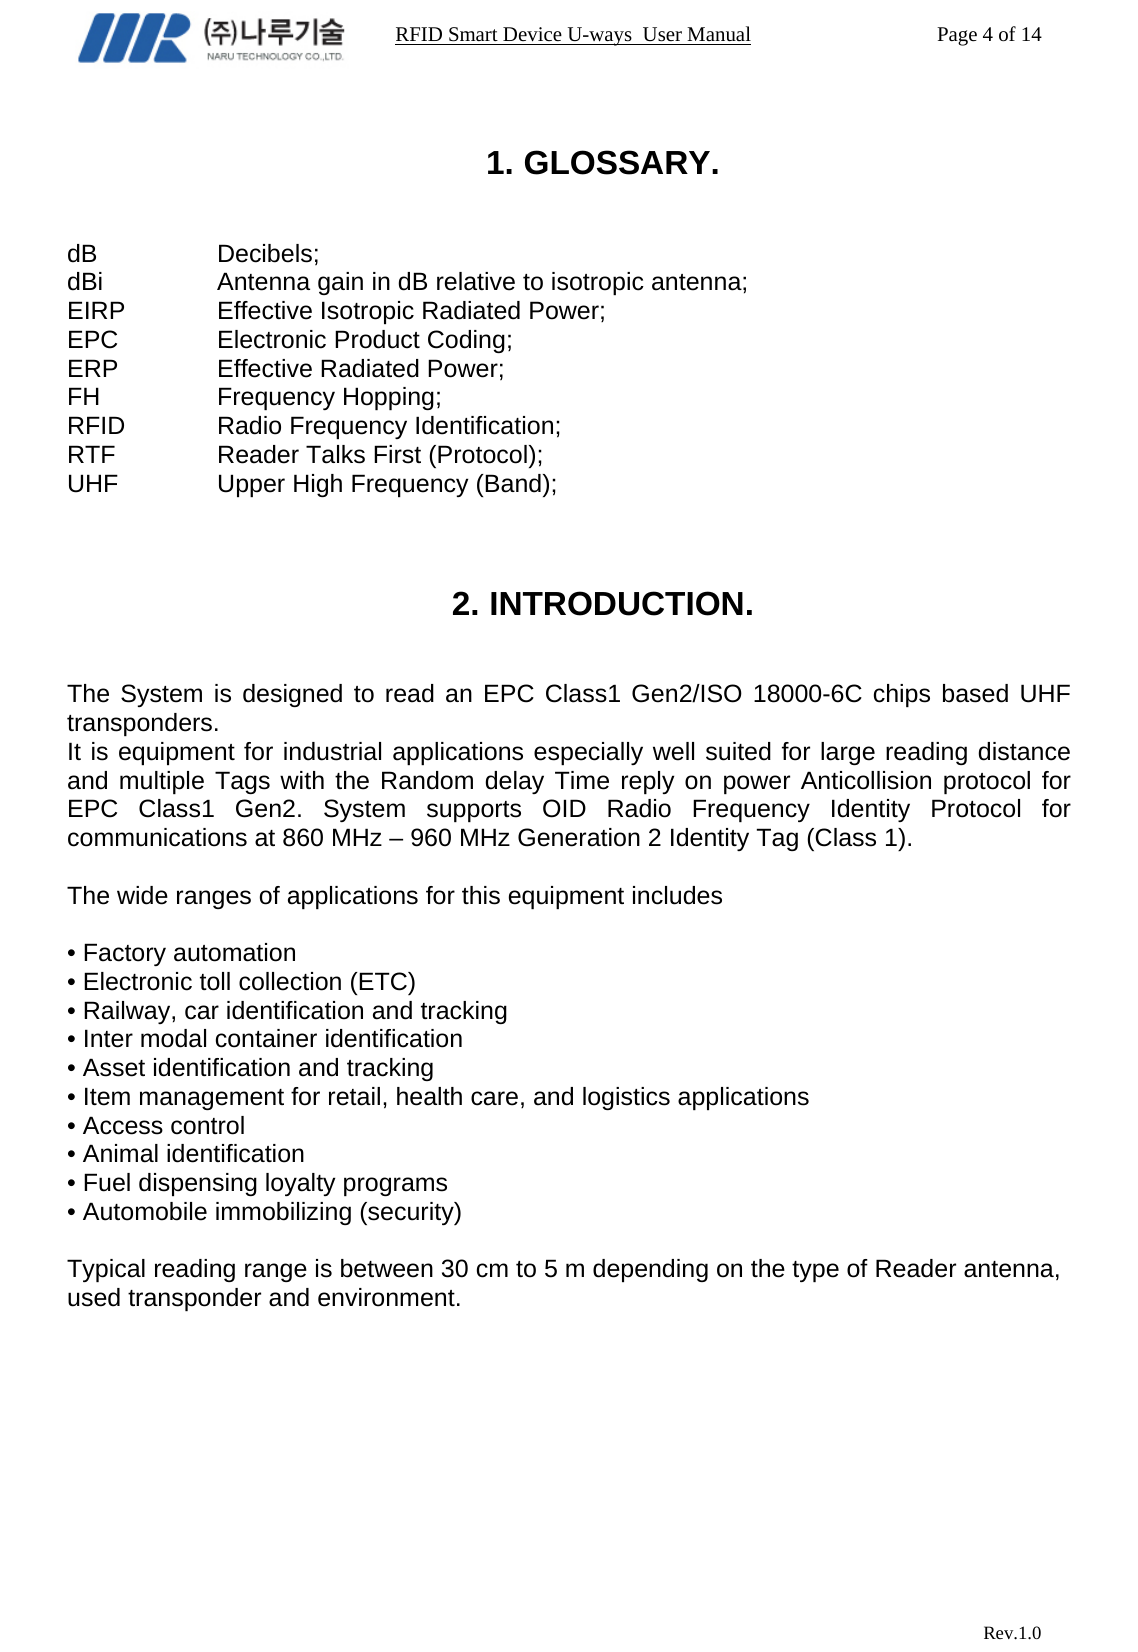                                                                RFID Smart Device U-ways  User Manual           Page 4 of 14                            Rev.1.0  1. GLOSSARY.   dB   Decibels; dBi    Antenna gain in dB relative to isotropic antenna; EIRP    Effective Isotropic Radiated Power; EPC   Electronic Product Coding; ERP    Effective Radiated Power; FH   Frequency Hopping; RFID   Radio Frequency Identification; RTF    Reader Talks First (Protocol); UHF    Upper High Frequency (Band);    2. INTRODUCTION.   The System is designed to read an EPC Class1 Gen2/ISO 18000-6C chips based UHF transponders. It is equipment for industrial applications especially well suited for large reading distance and multiple Tags with the Random delay Time reply on power Anticollision protocol for EPC Class1 Gen2. System supports OID Radio Frequency Identity Protocol for communications at 860 MHz – 960 MHz Generation 2 Identity Tag (Class 1).  The wide ranges of applications for this equipment includes  • Factory automation • Electronic toll collection (ETC) • Railway, car identification and tracking • Inter modal container identification • Asset identification and tracking • Item management for retail, health care, and logistics applications • Access control • Animal identification • Fuel dispensing loyalty programs • Automobile immobilizing (security)  Typical reading range is between 30 cm to 5 m depending on the type of Reader antenna, used transponder and environment.  